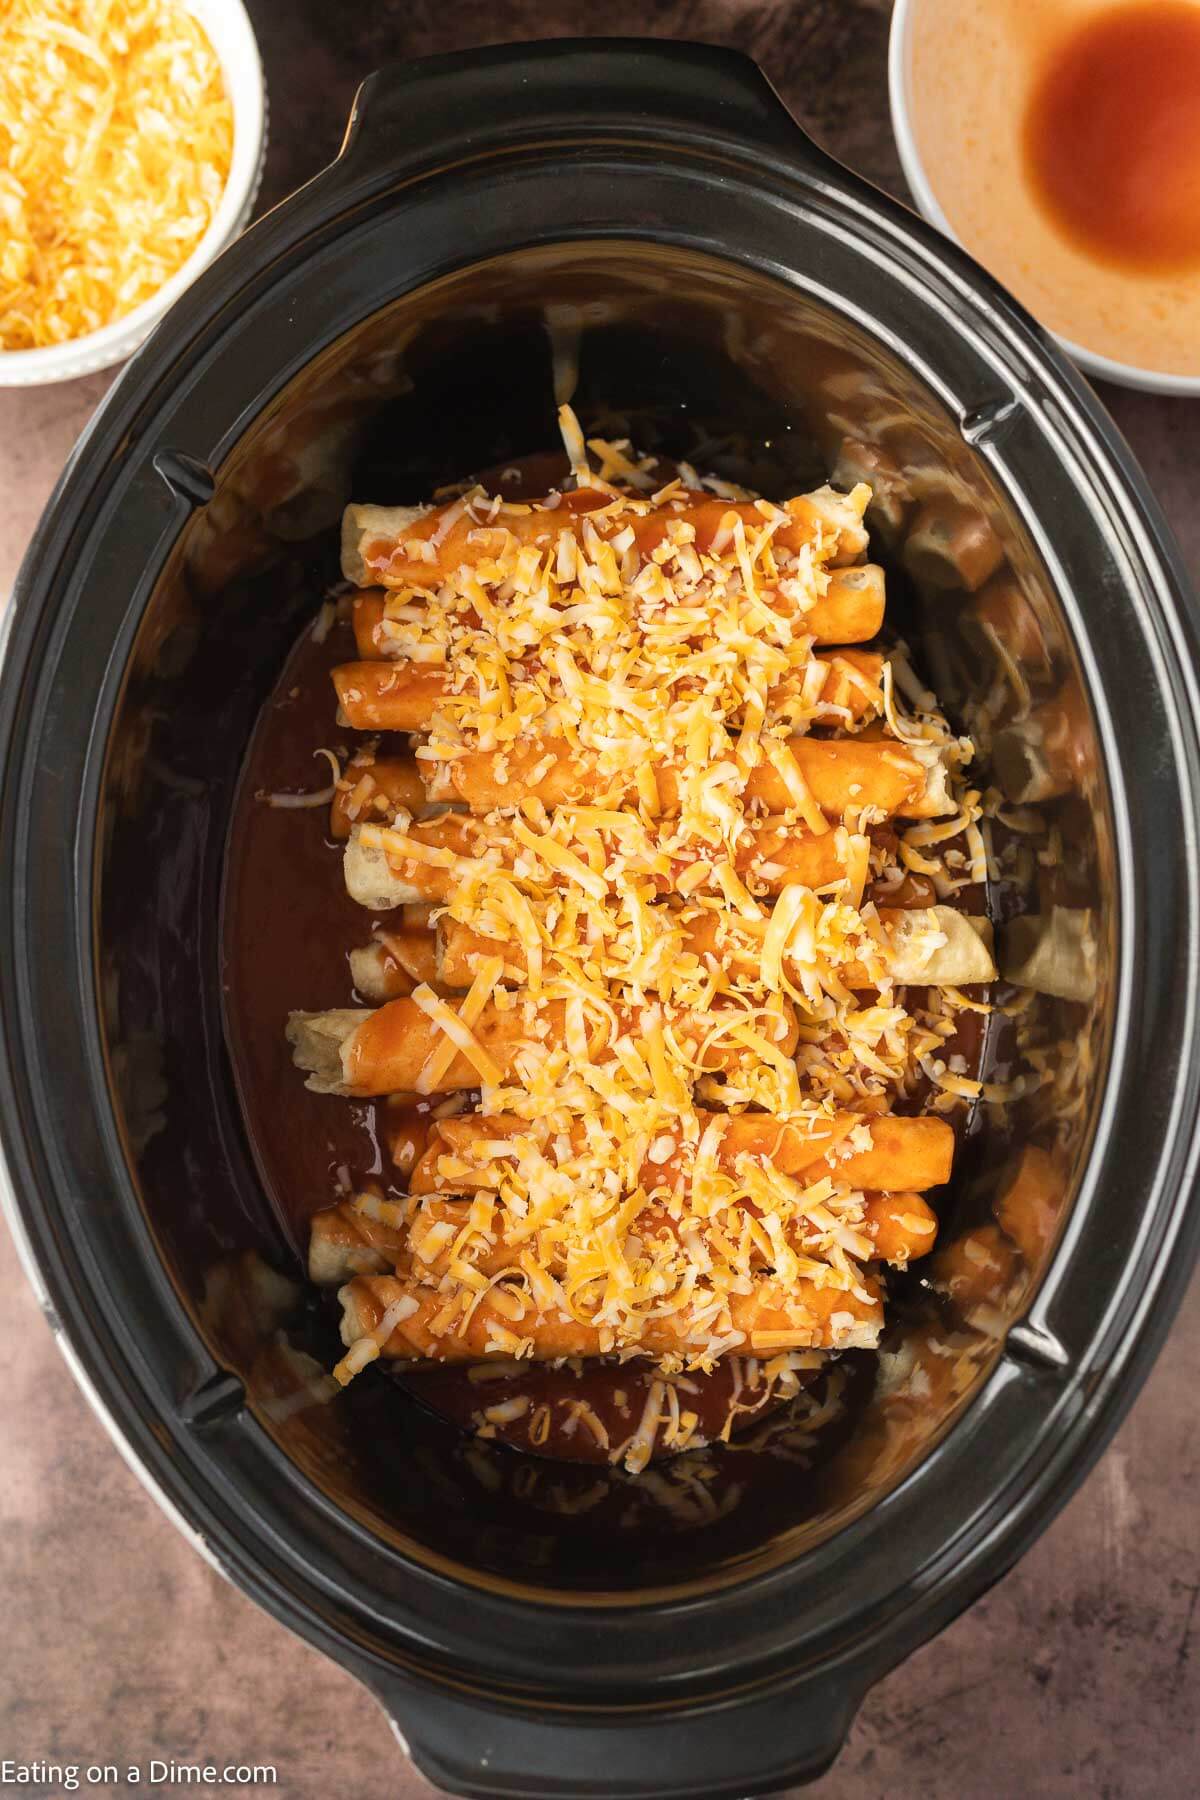 Topping the taquitos with enchilada sauce and cheese